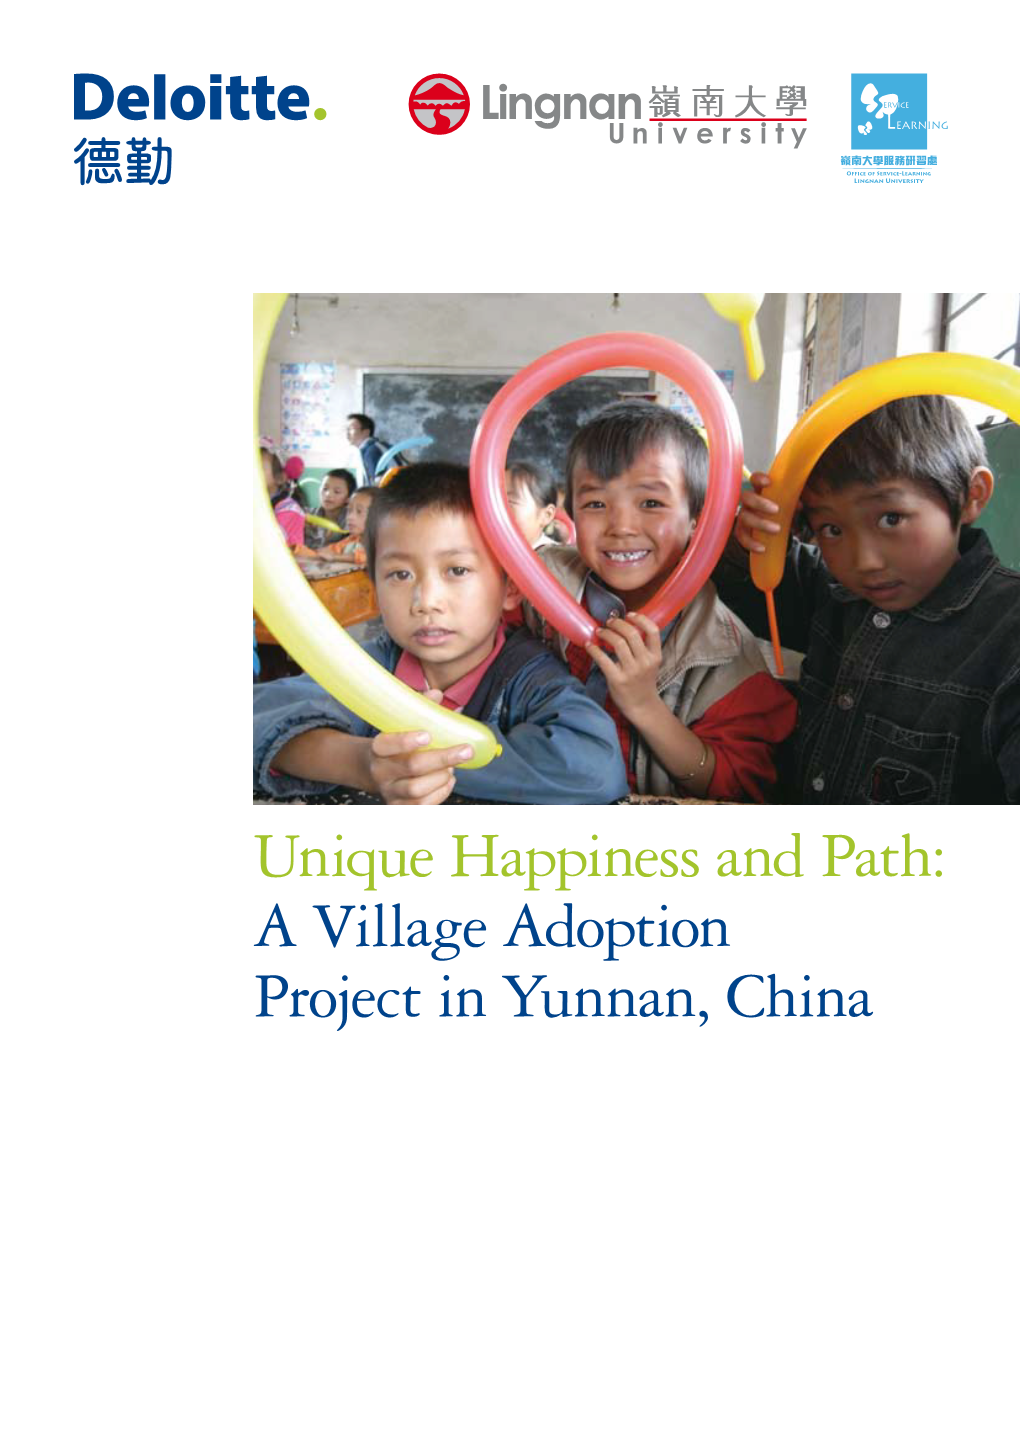 Unique Happiness and Path: a Village Adoption Project in Yunnan, China